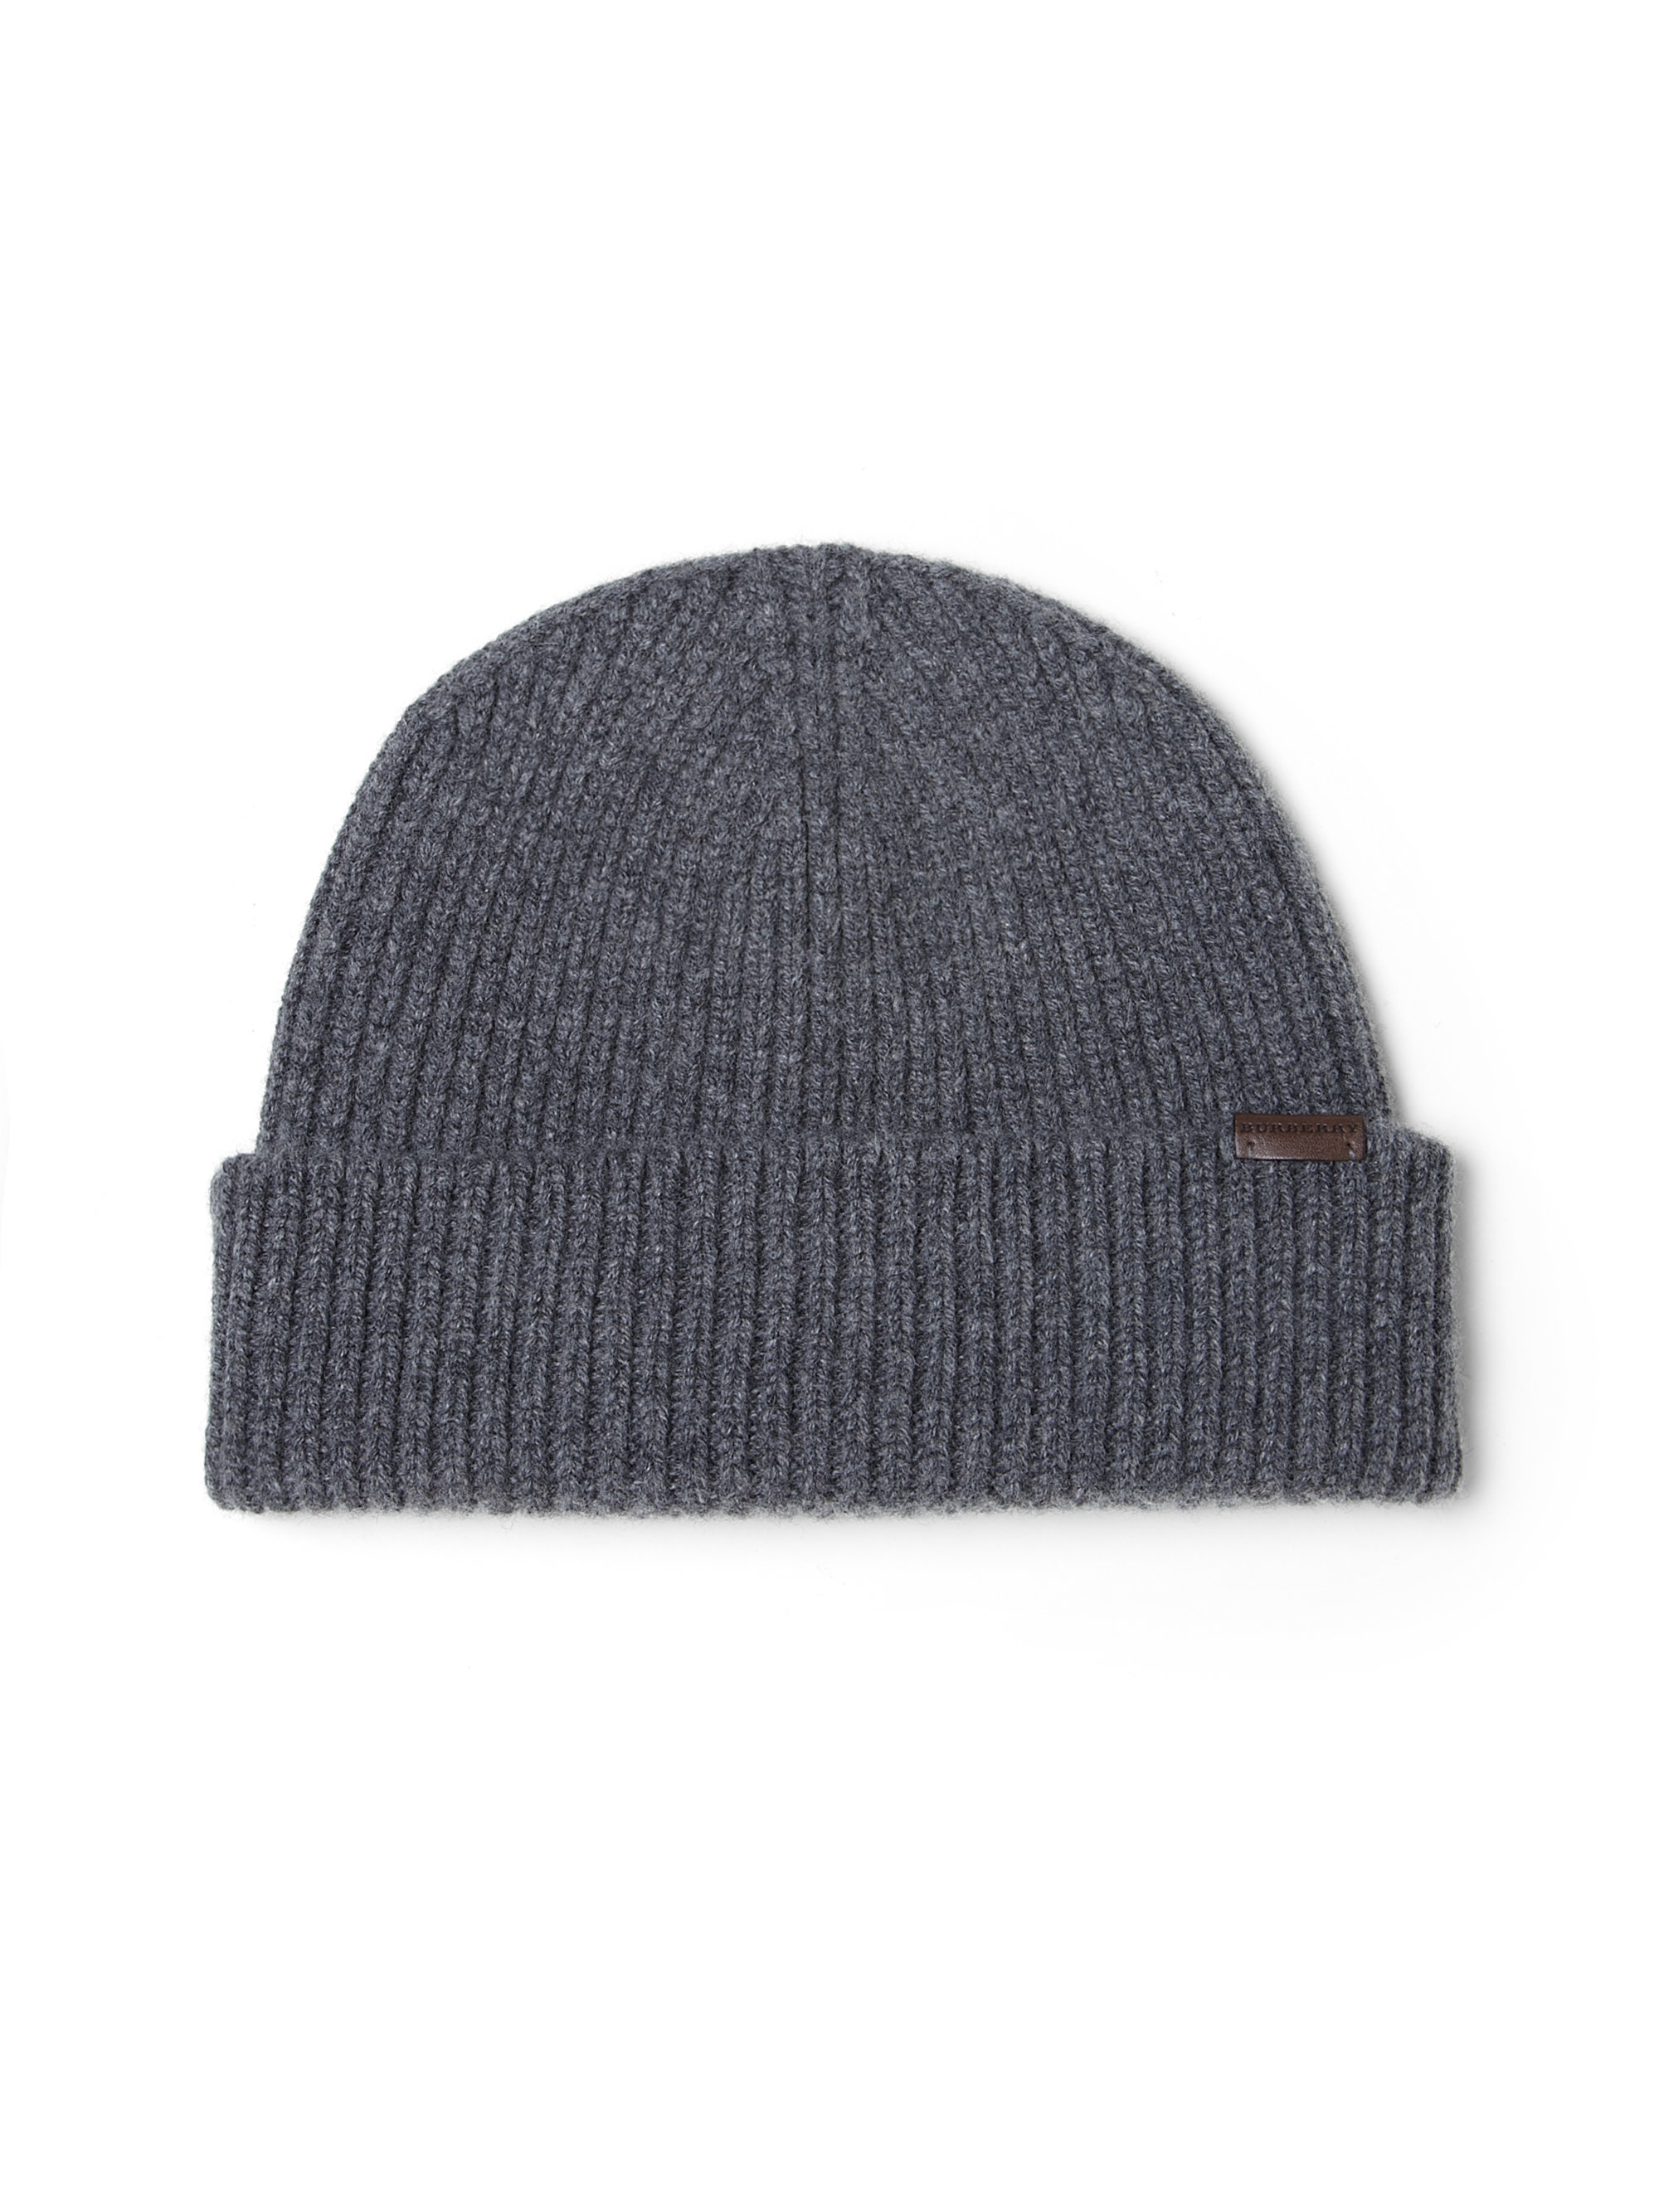 Lyst - Burberry Wool & Cashmere Beanie Hat in Gray for Men